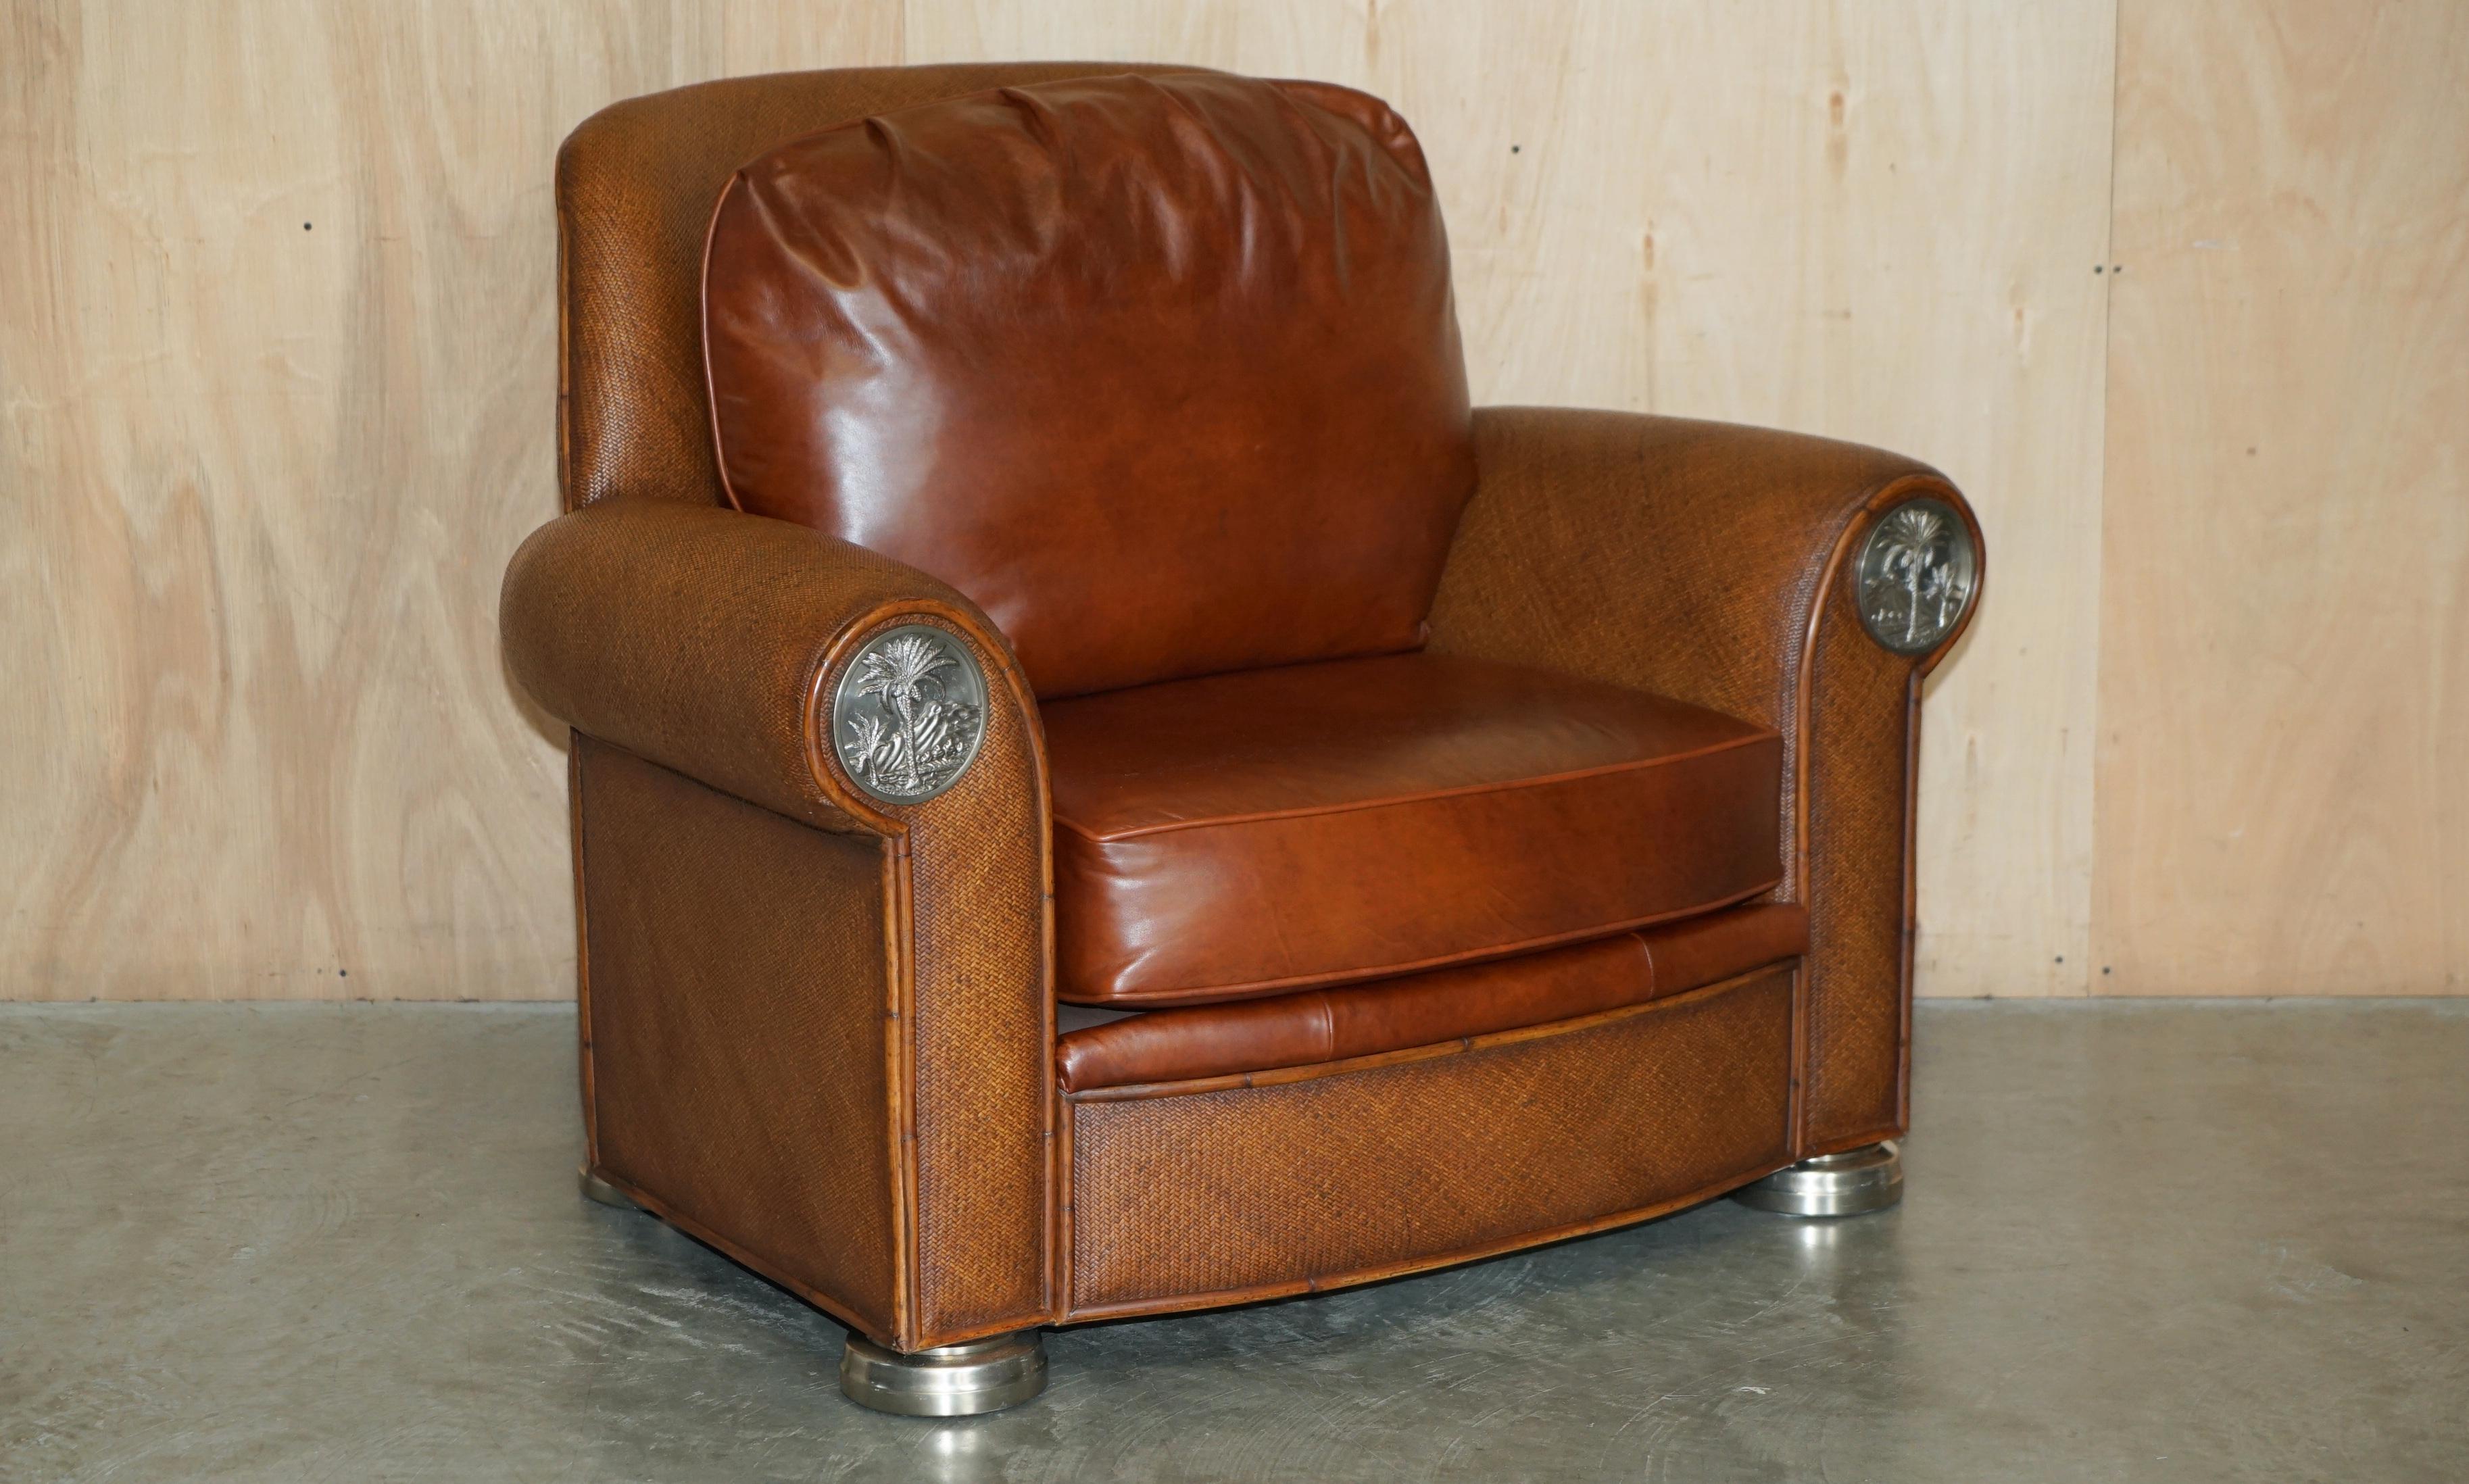 We are delighted to offer for sale this exquisite Thomasville Safari Collection armchair with matching ottoman and brown leather cushions seated on woven frames which are part of a large suite 

I have a rather lovely suite of this Thomasville